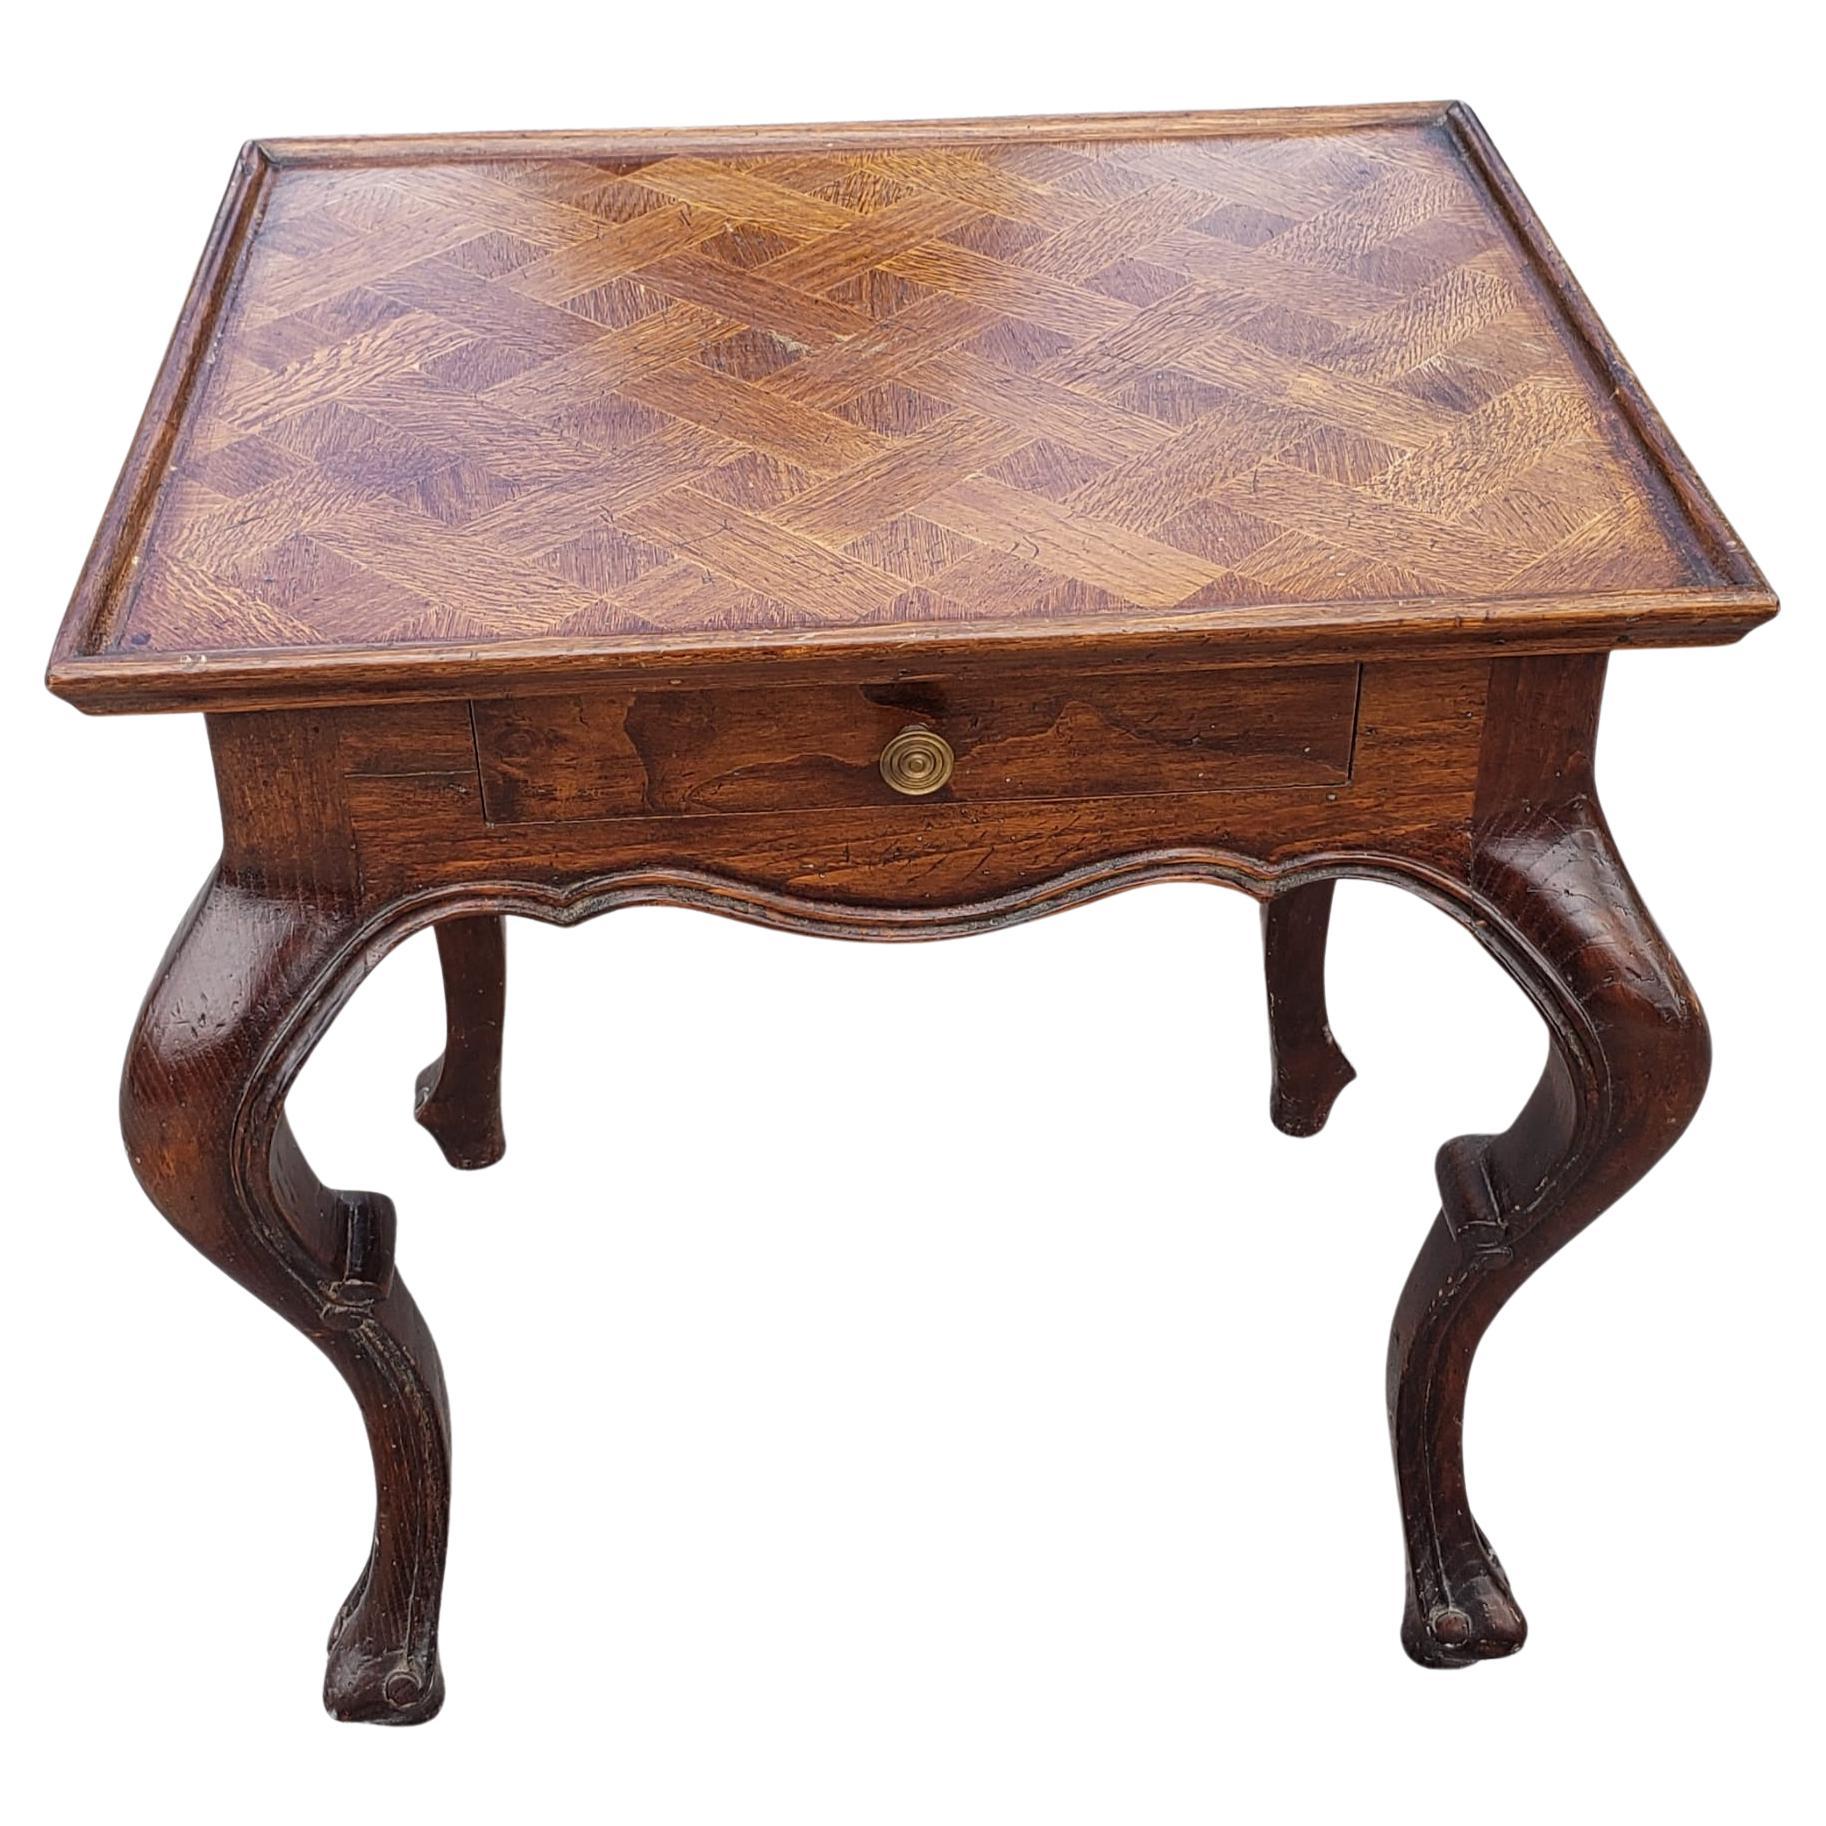 A stylish Louis XV Style French Provincial Parquet Walnut Side Table in very good vintage condition. 
Measures 26